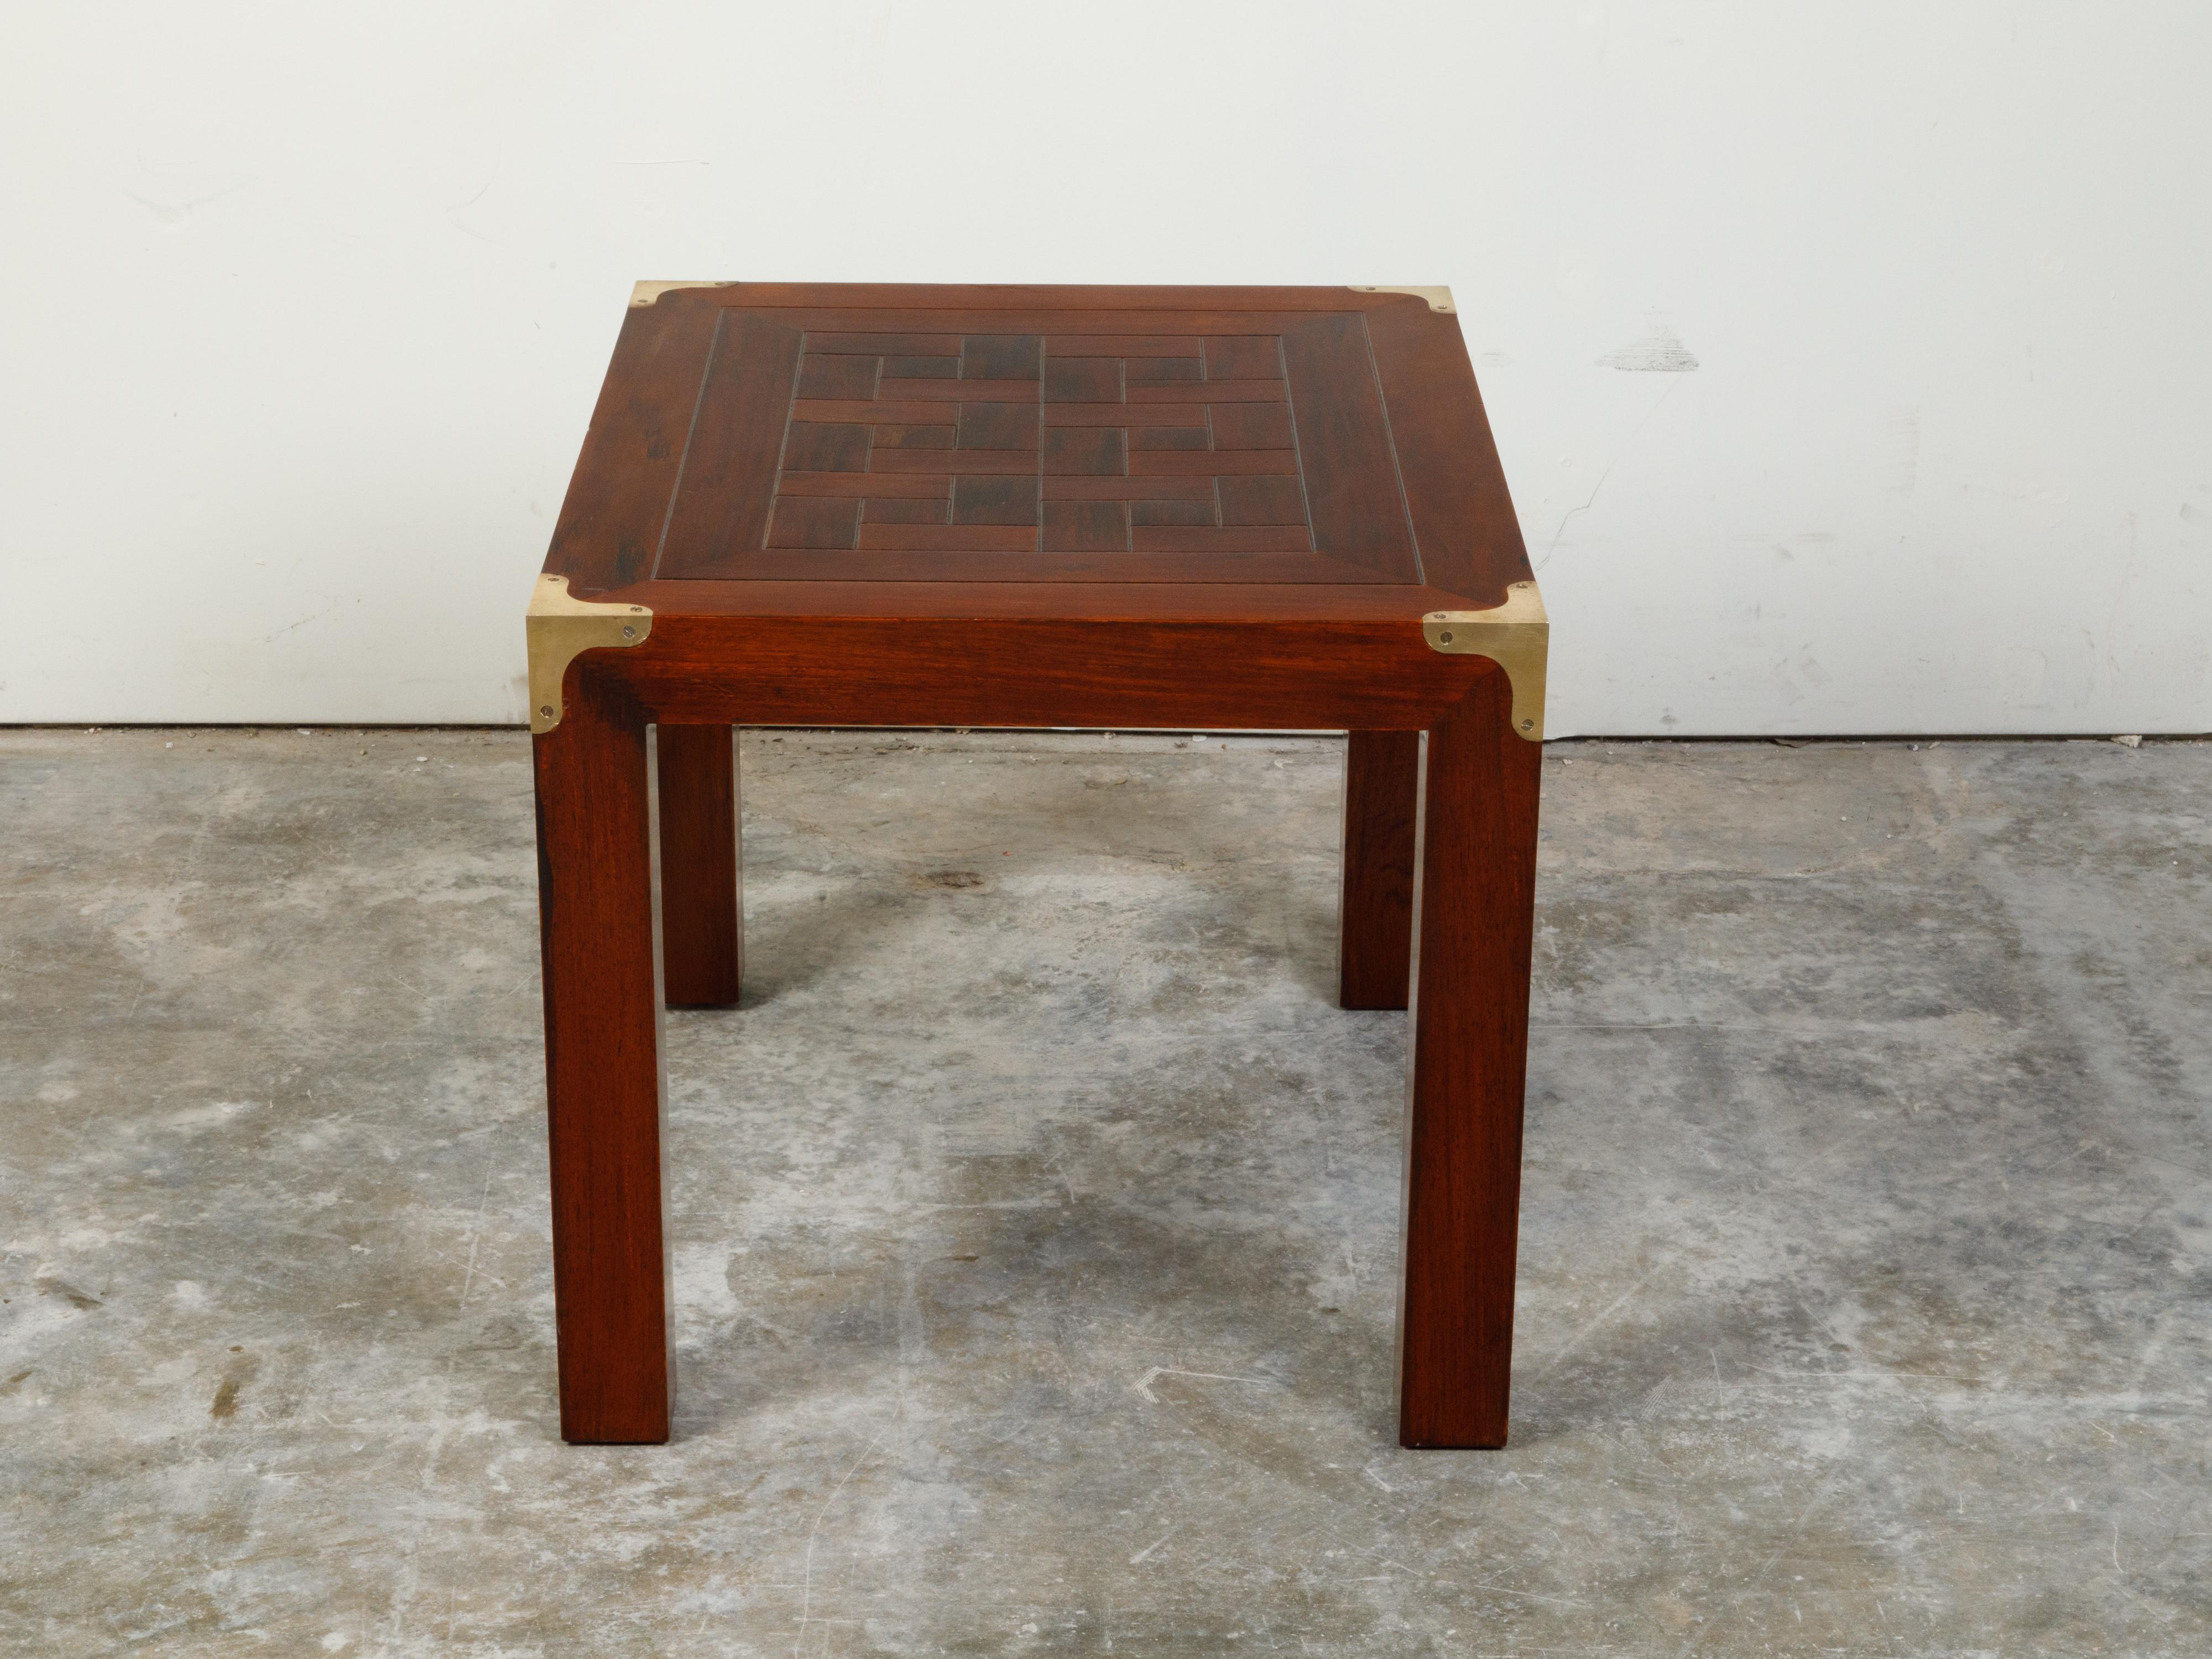 20th Century English Midcentury Campaign Style Side Table with Parquet Top and Brass Braces For Sale